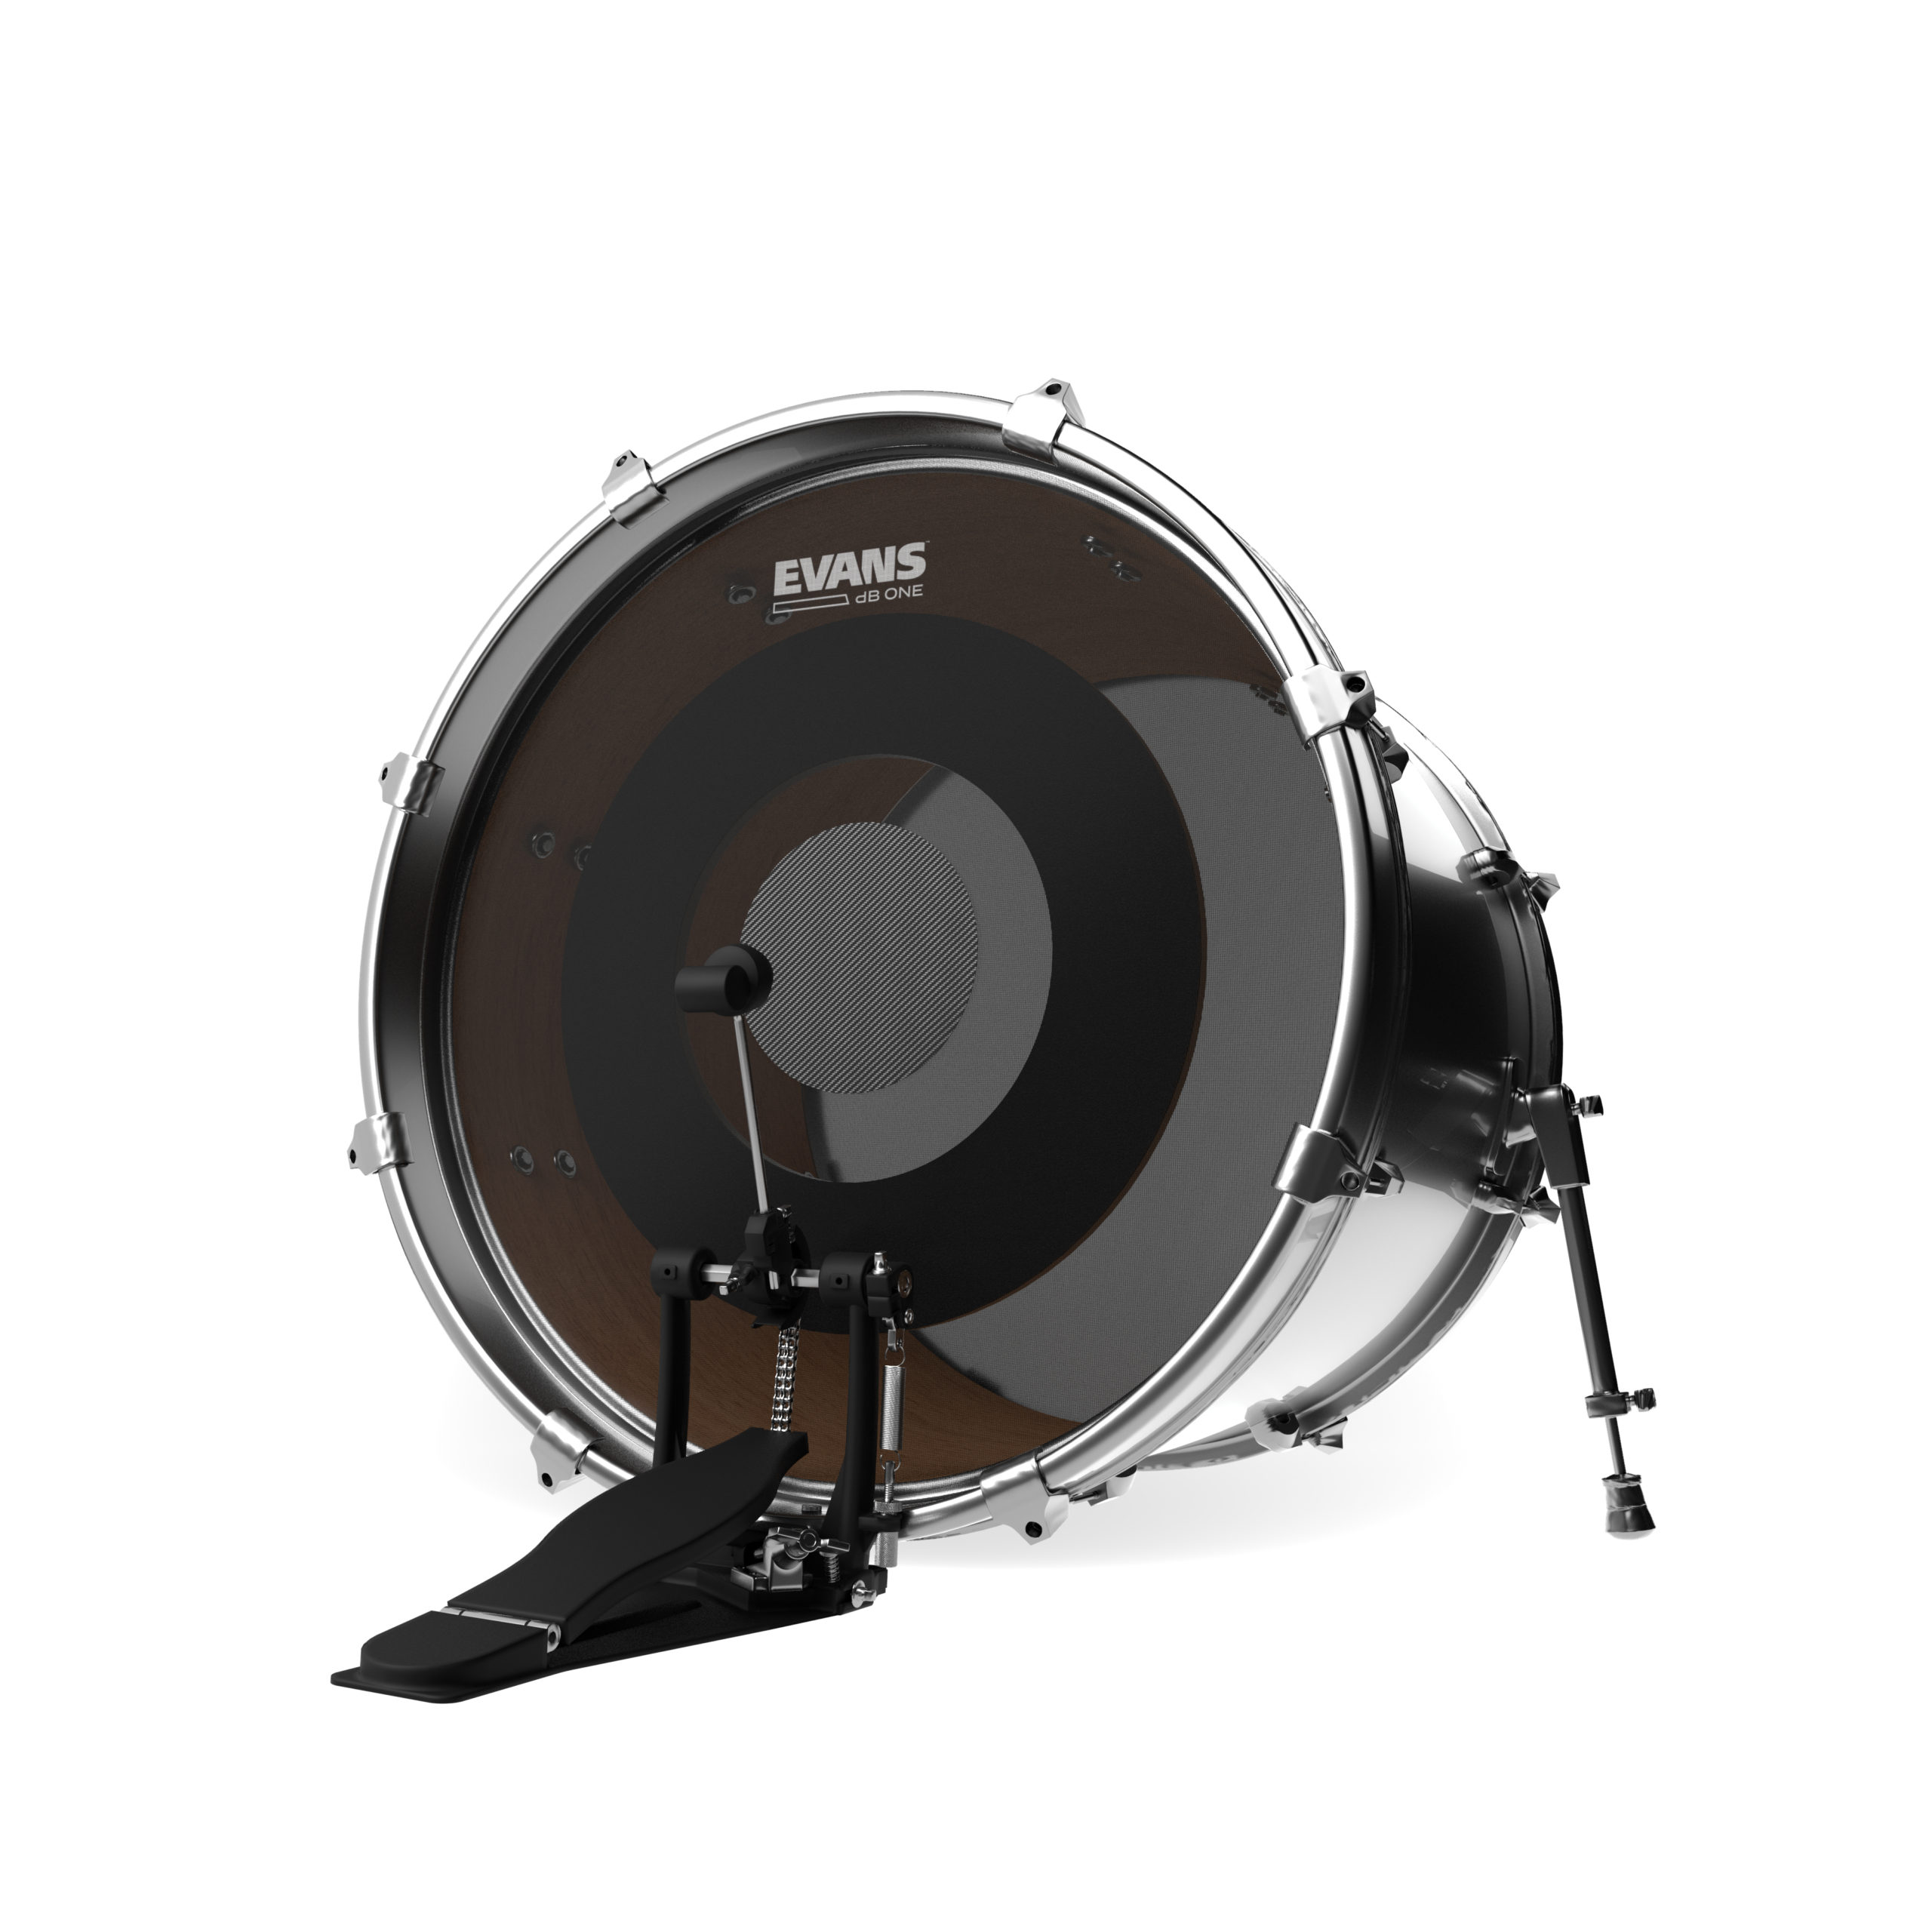 Evan's Pack Rock dB One + 14", 22" et cymbales dB One